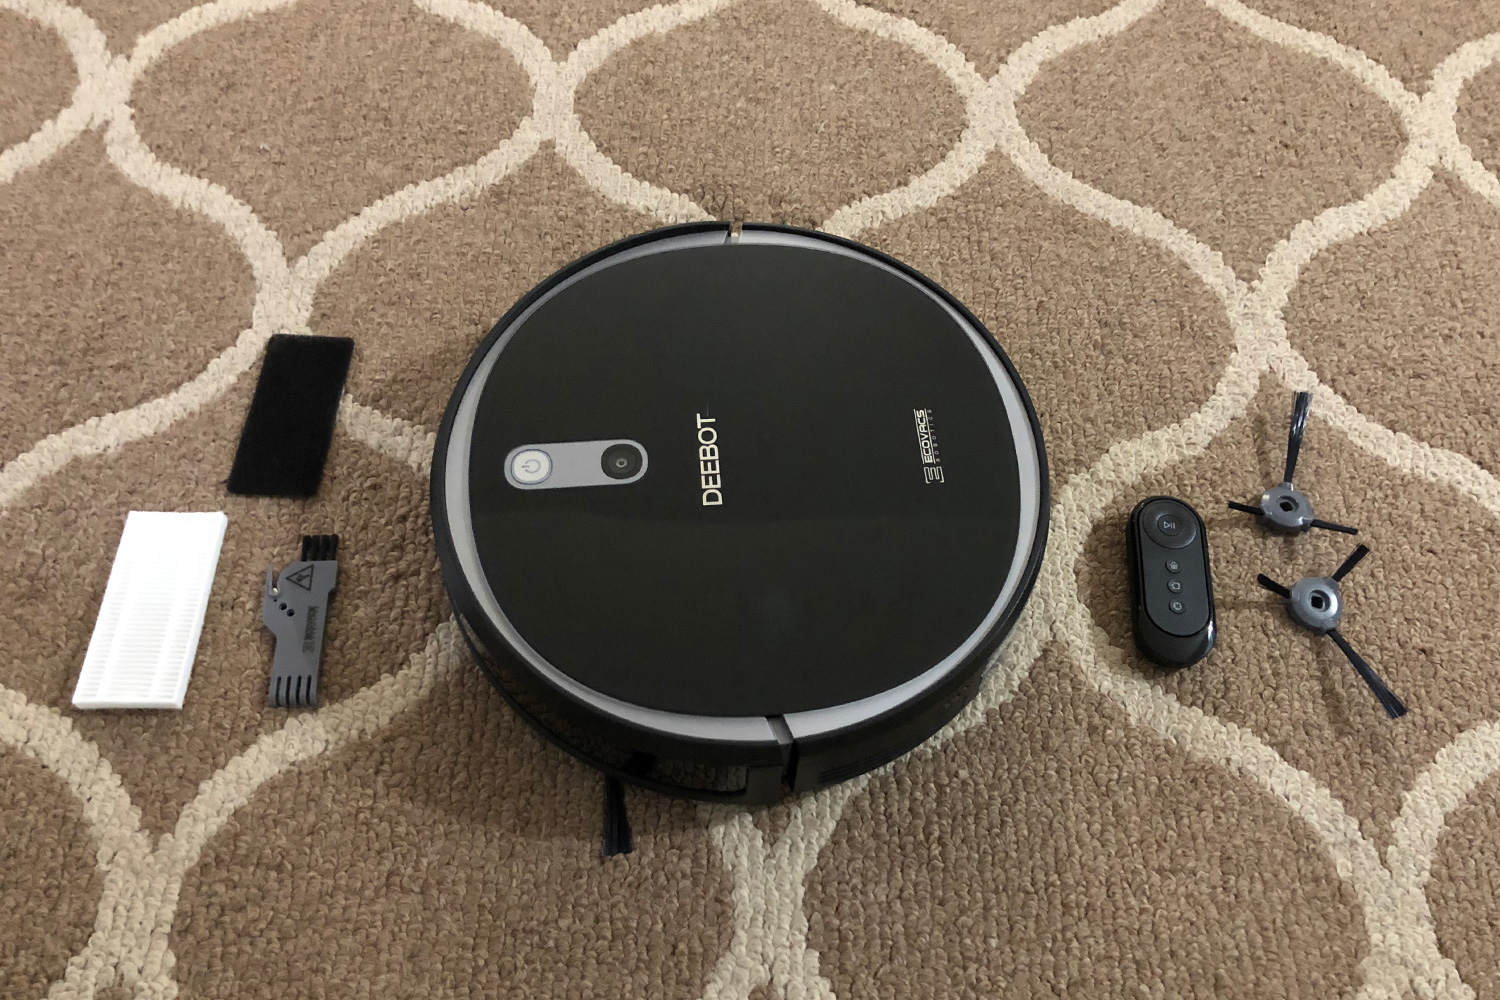 Ecovacs Deebot 711 robot vacuum review: Housekeeping help you can trust